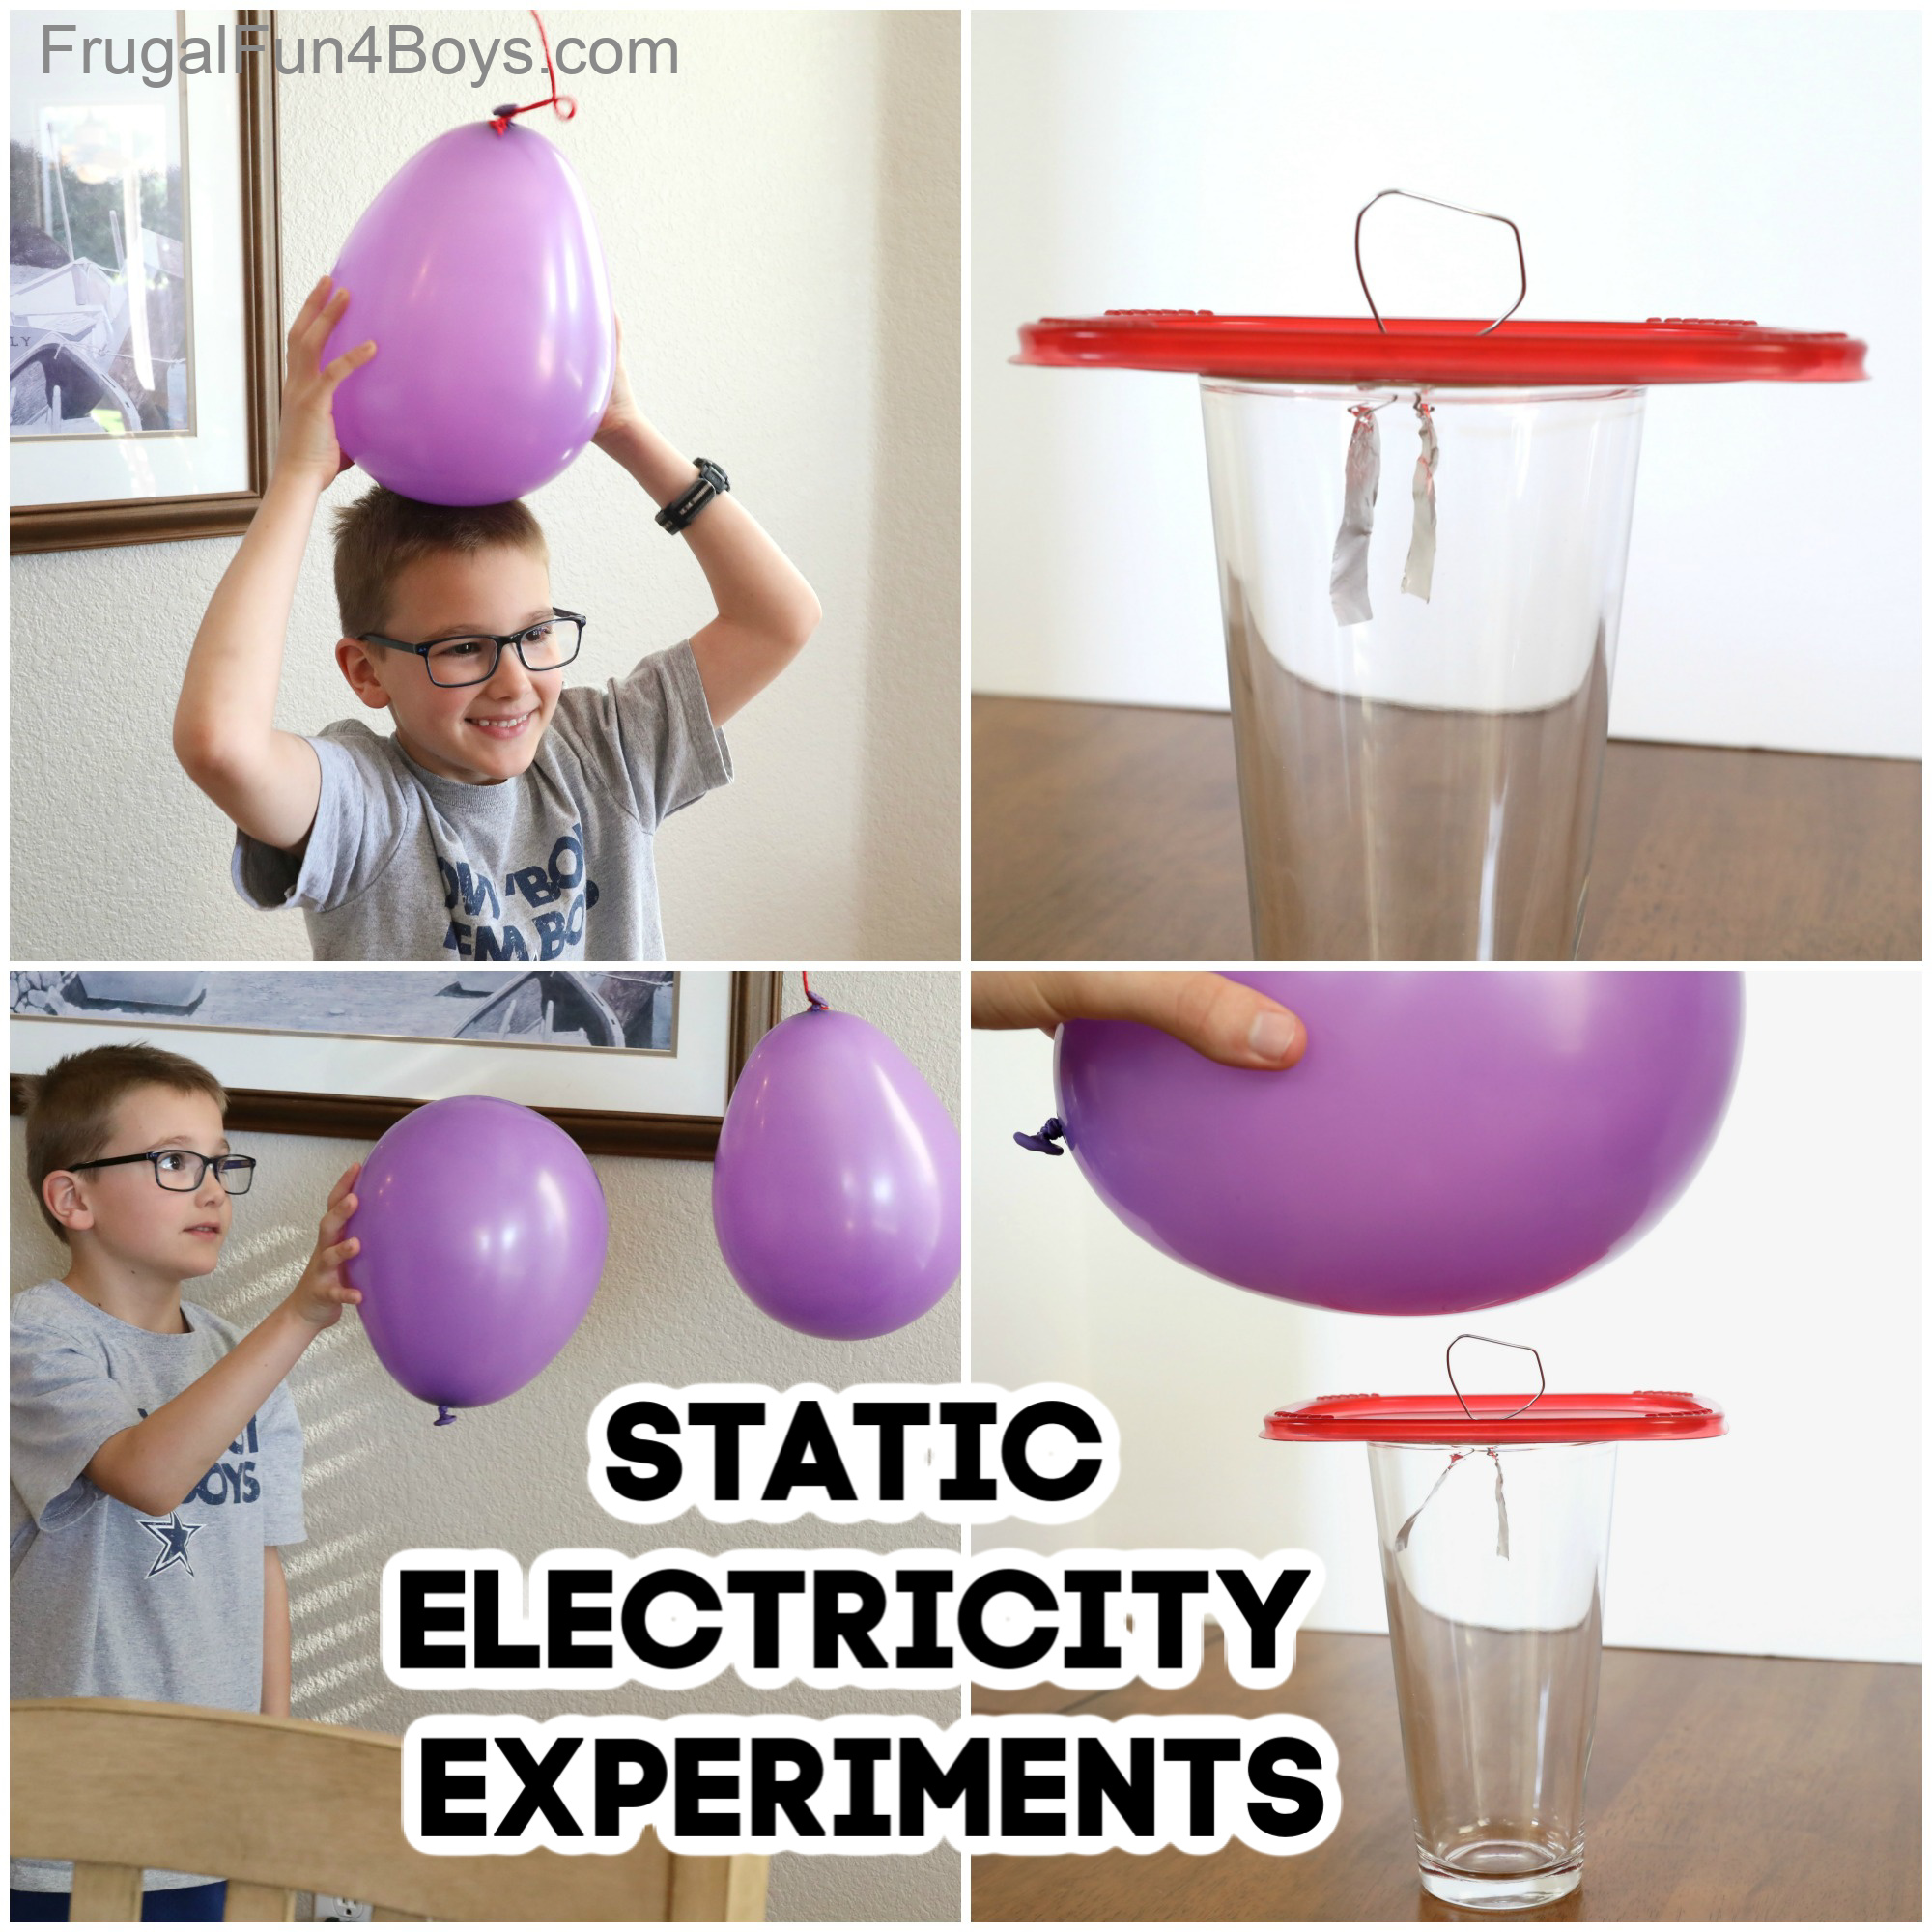 vonnis Toepassing Conciërge Static Electricity Science Experiments with Balloons - Frugal Fun For Boys  and Girls